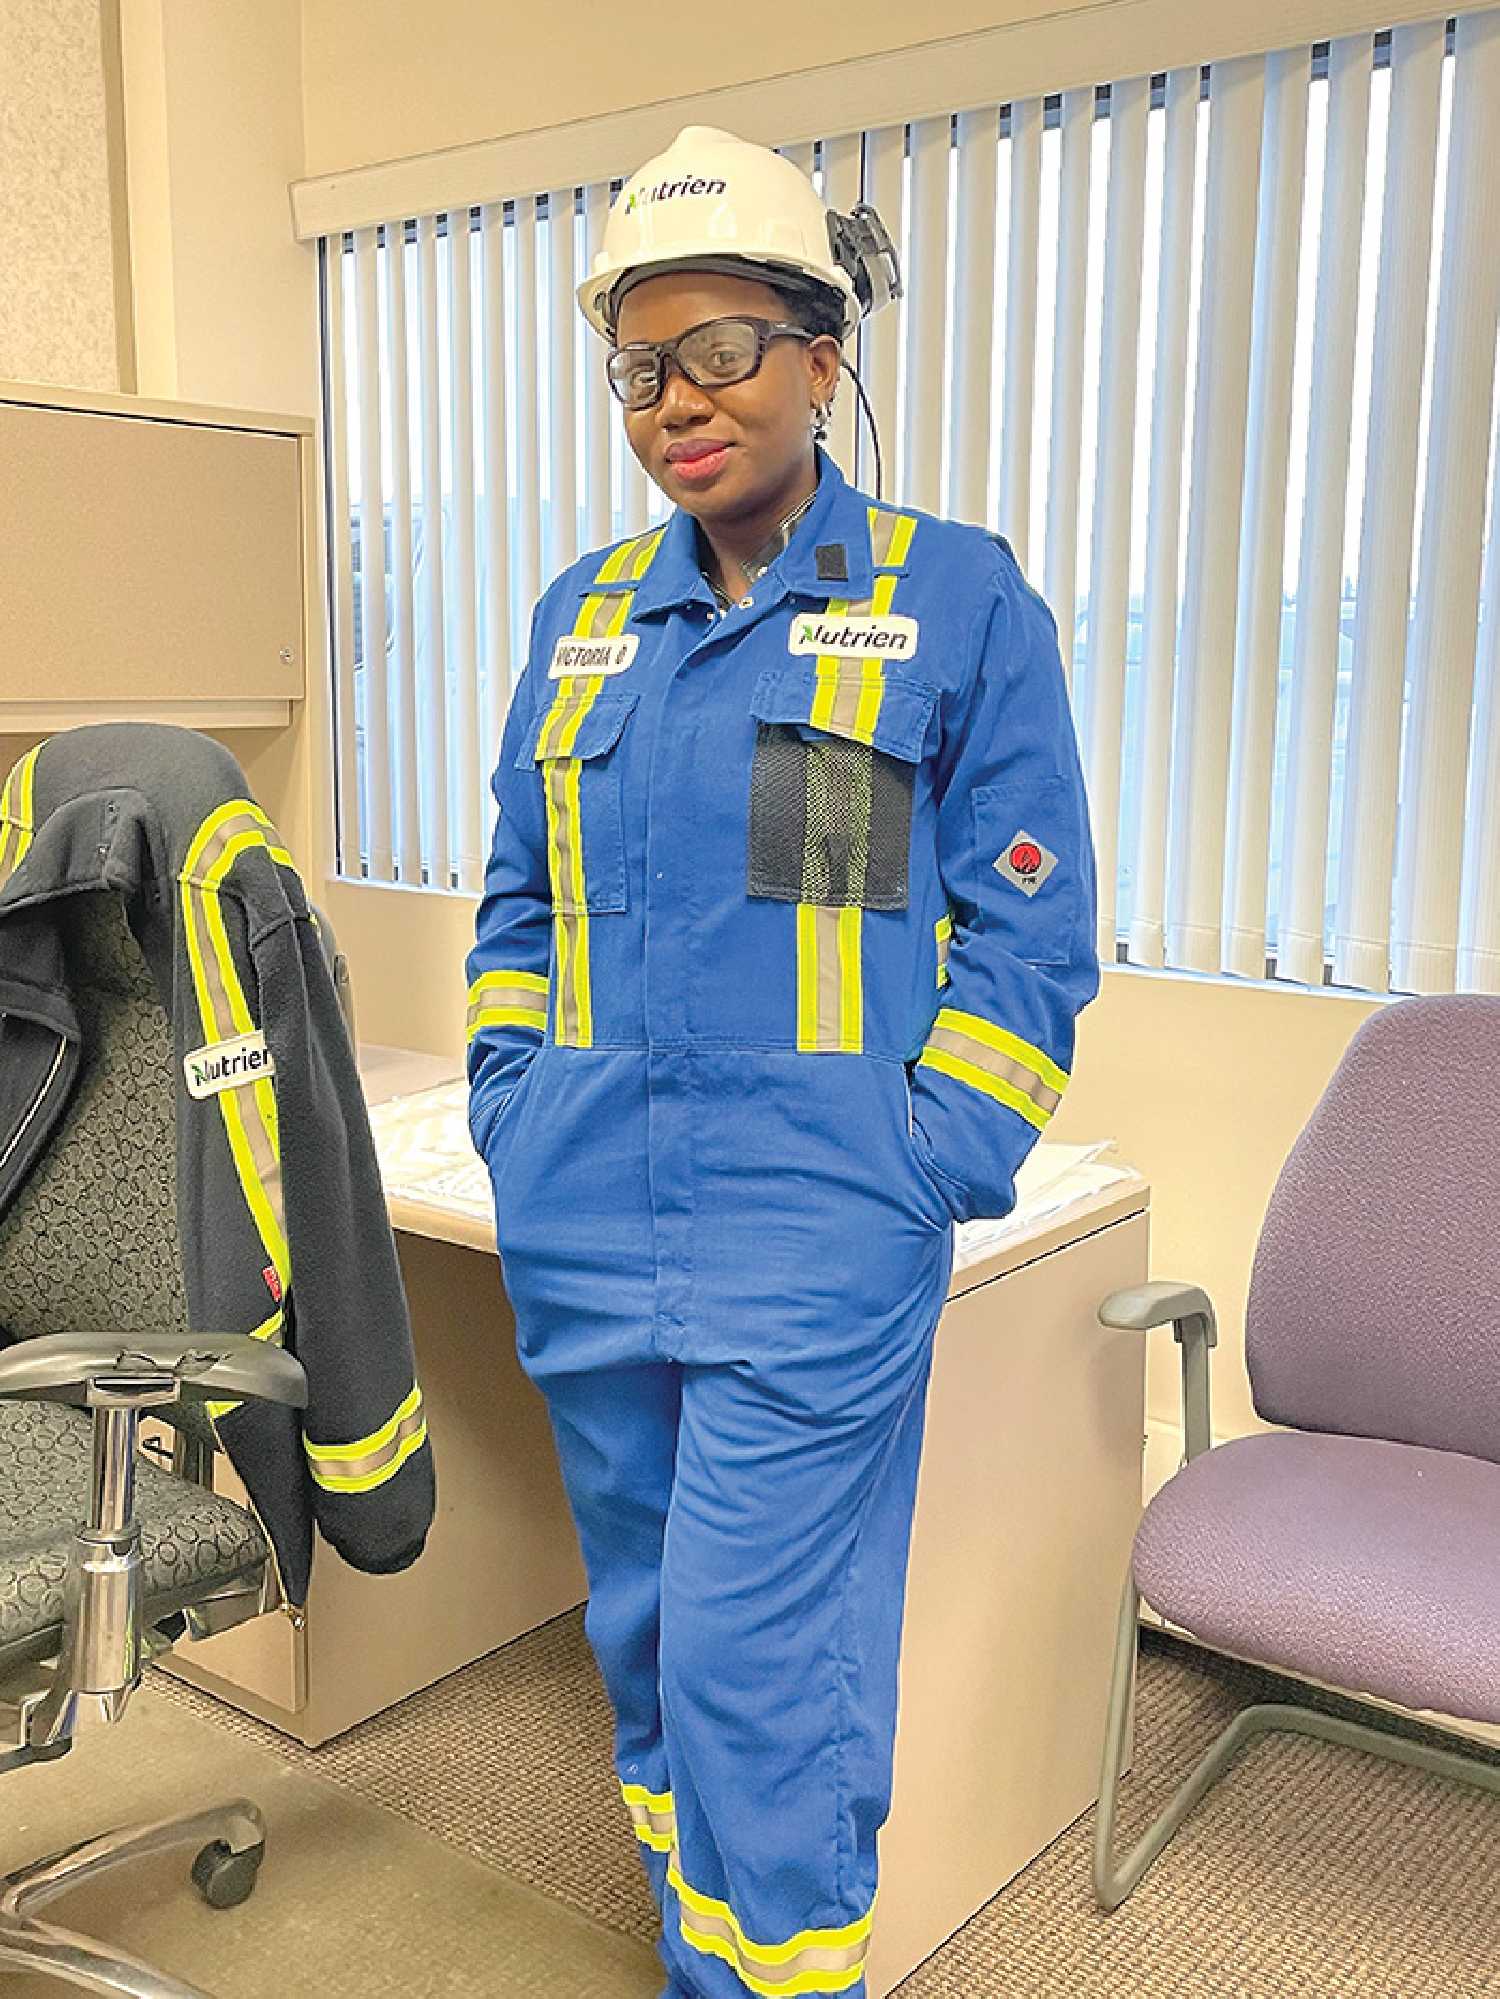 Victoria Orenuga has been working as a Process Safety Management Engineer at Nutrien for over a year and says the company’s efforts to provide an inclusive space for all workers has been welcoming and effective. 